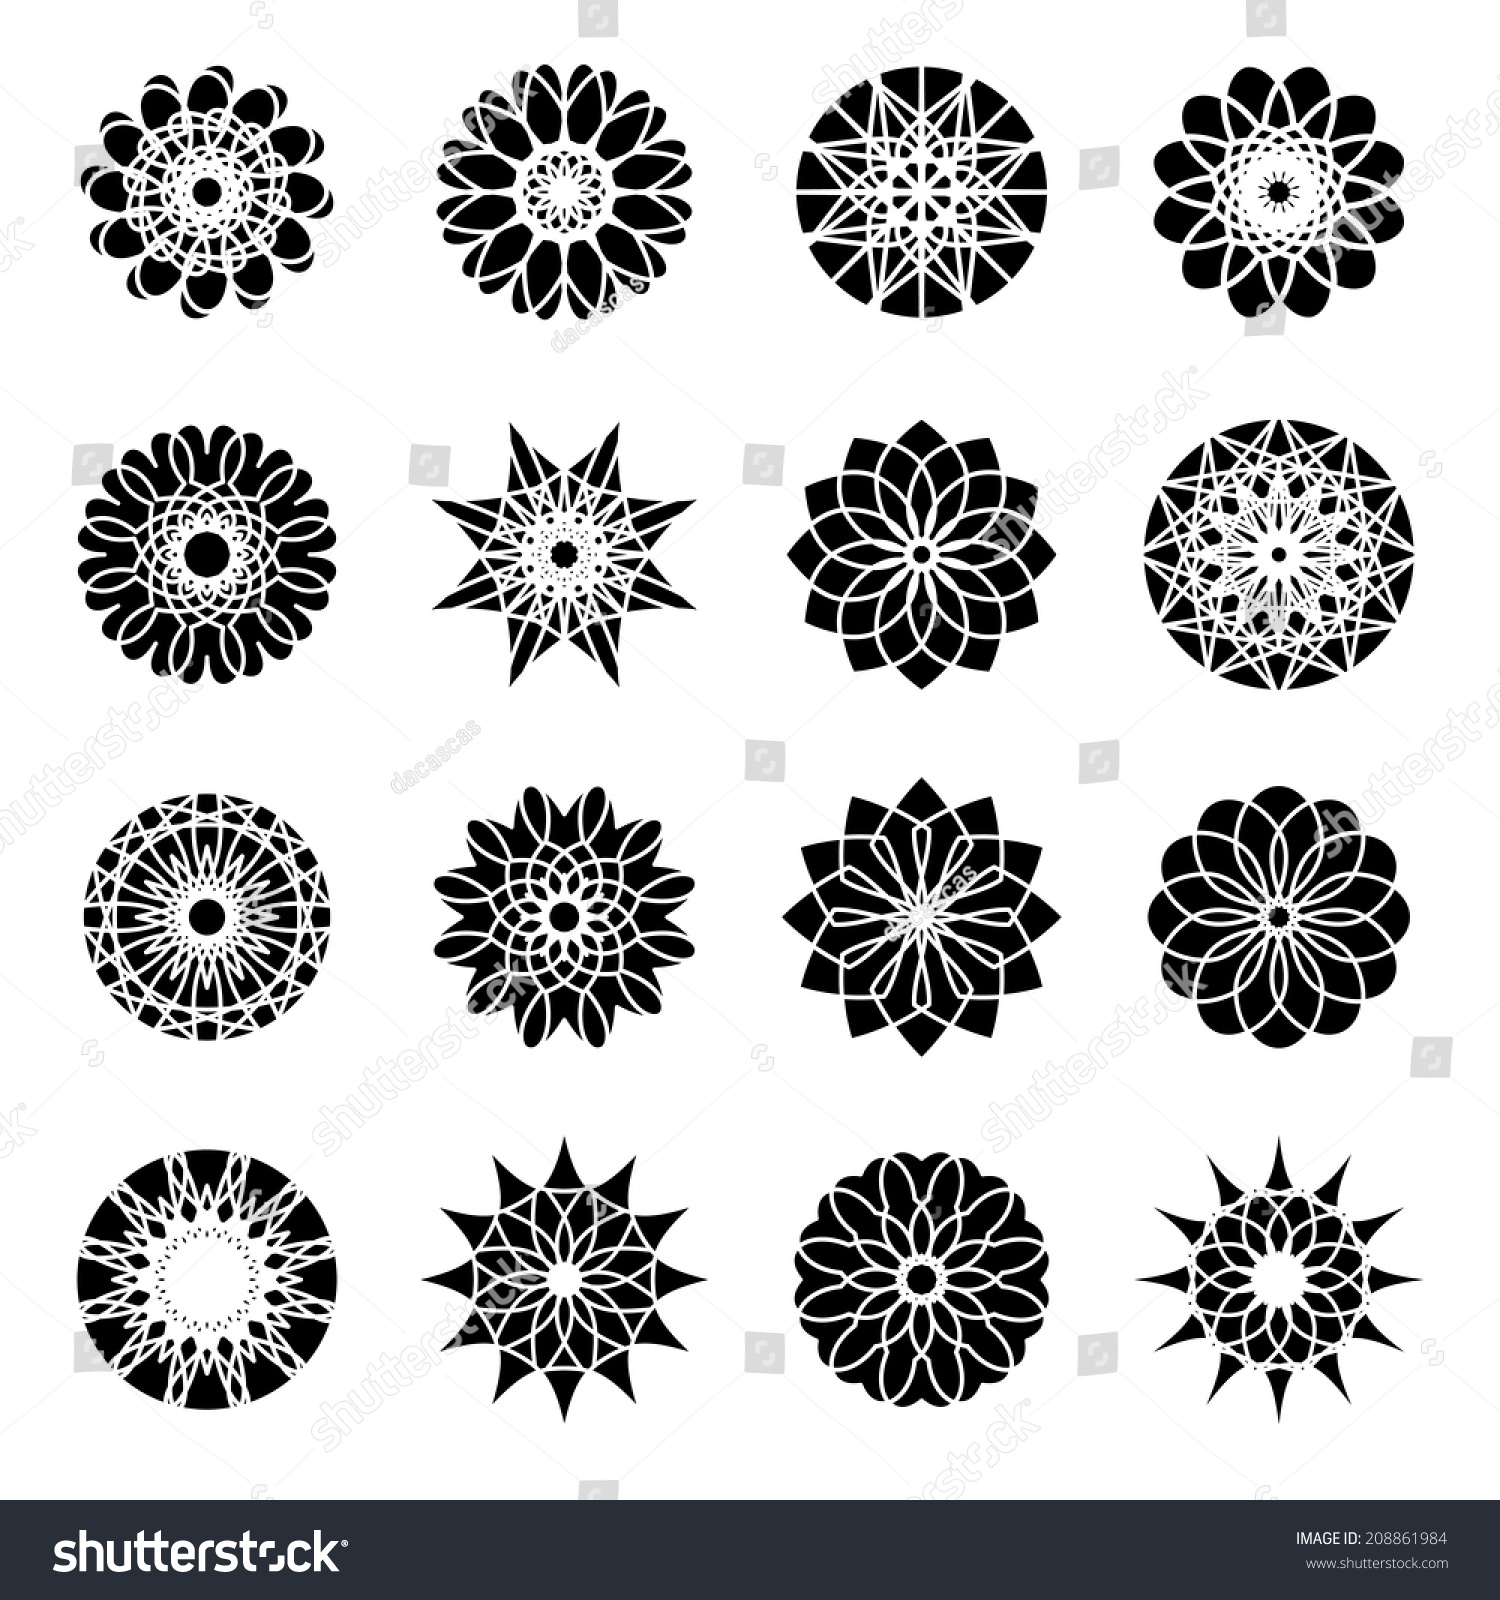 Black Round East Ornament Set Vector Stock Vector (Royalty Free ...